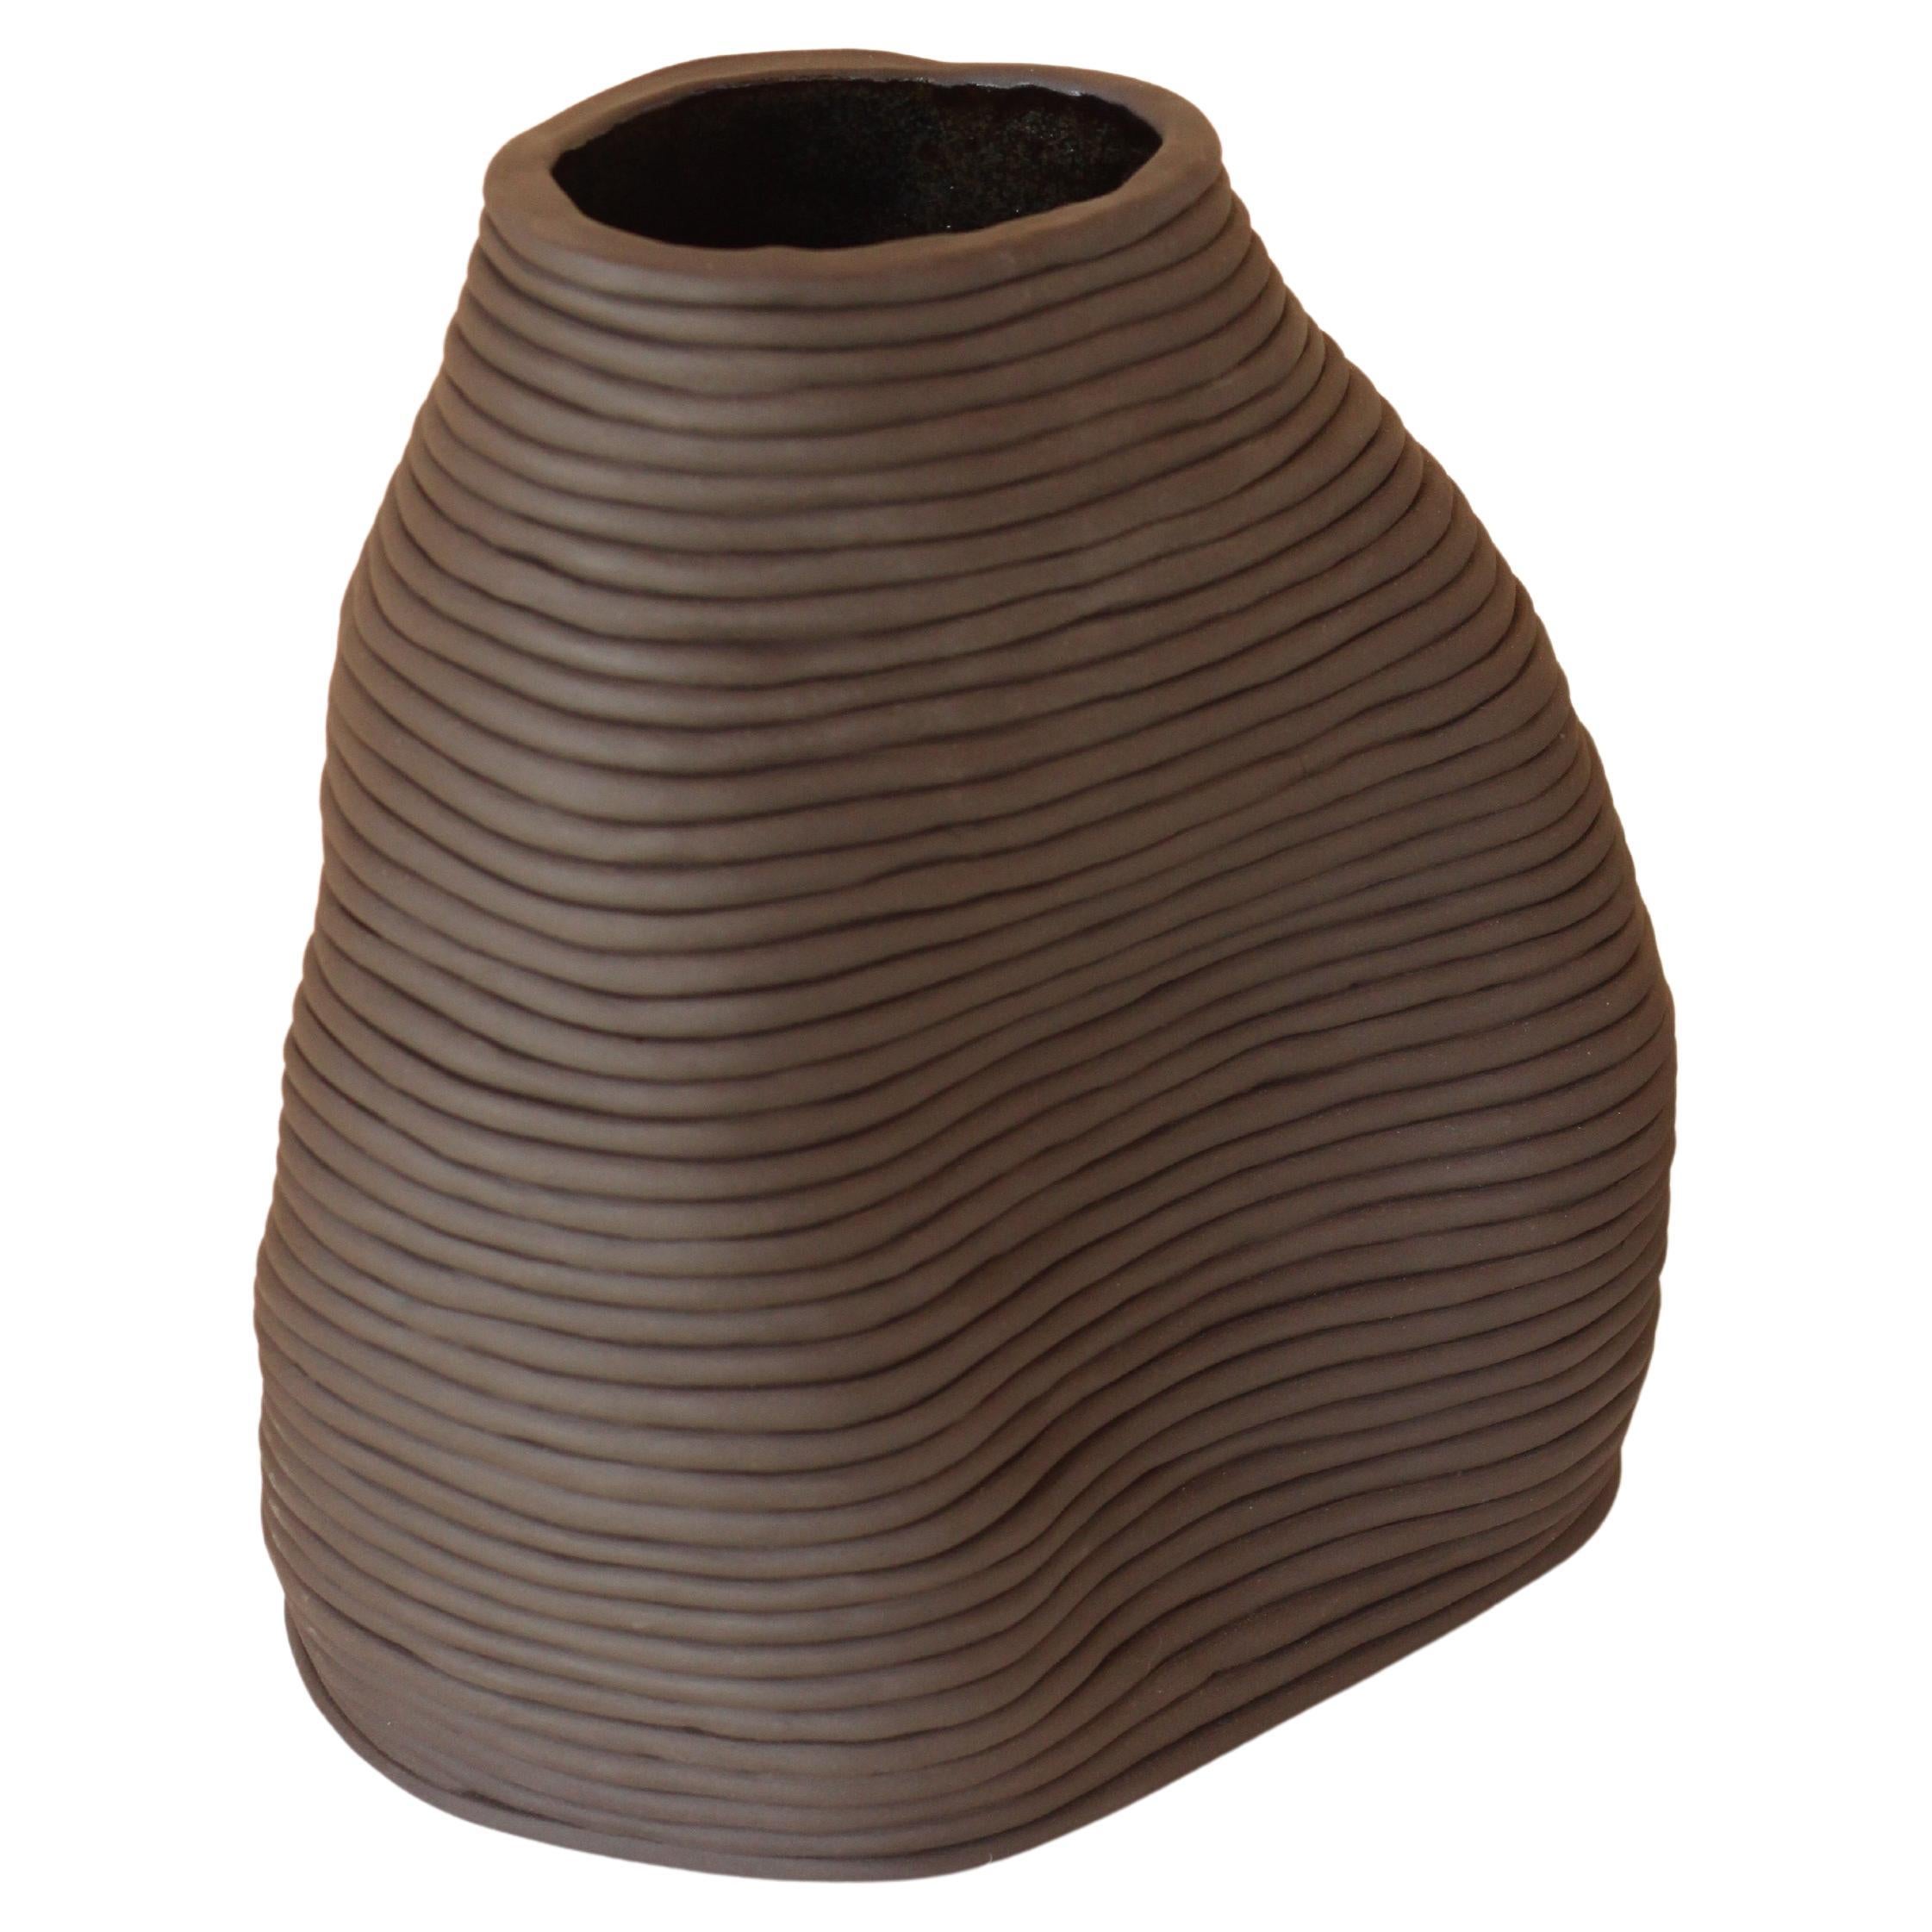 Vase Sculpture Handcrafted Tupiniquim 24 For Sale